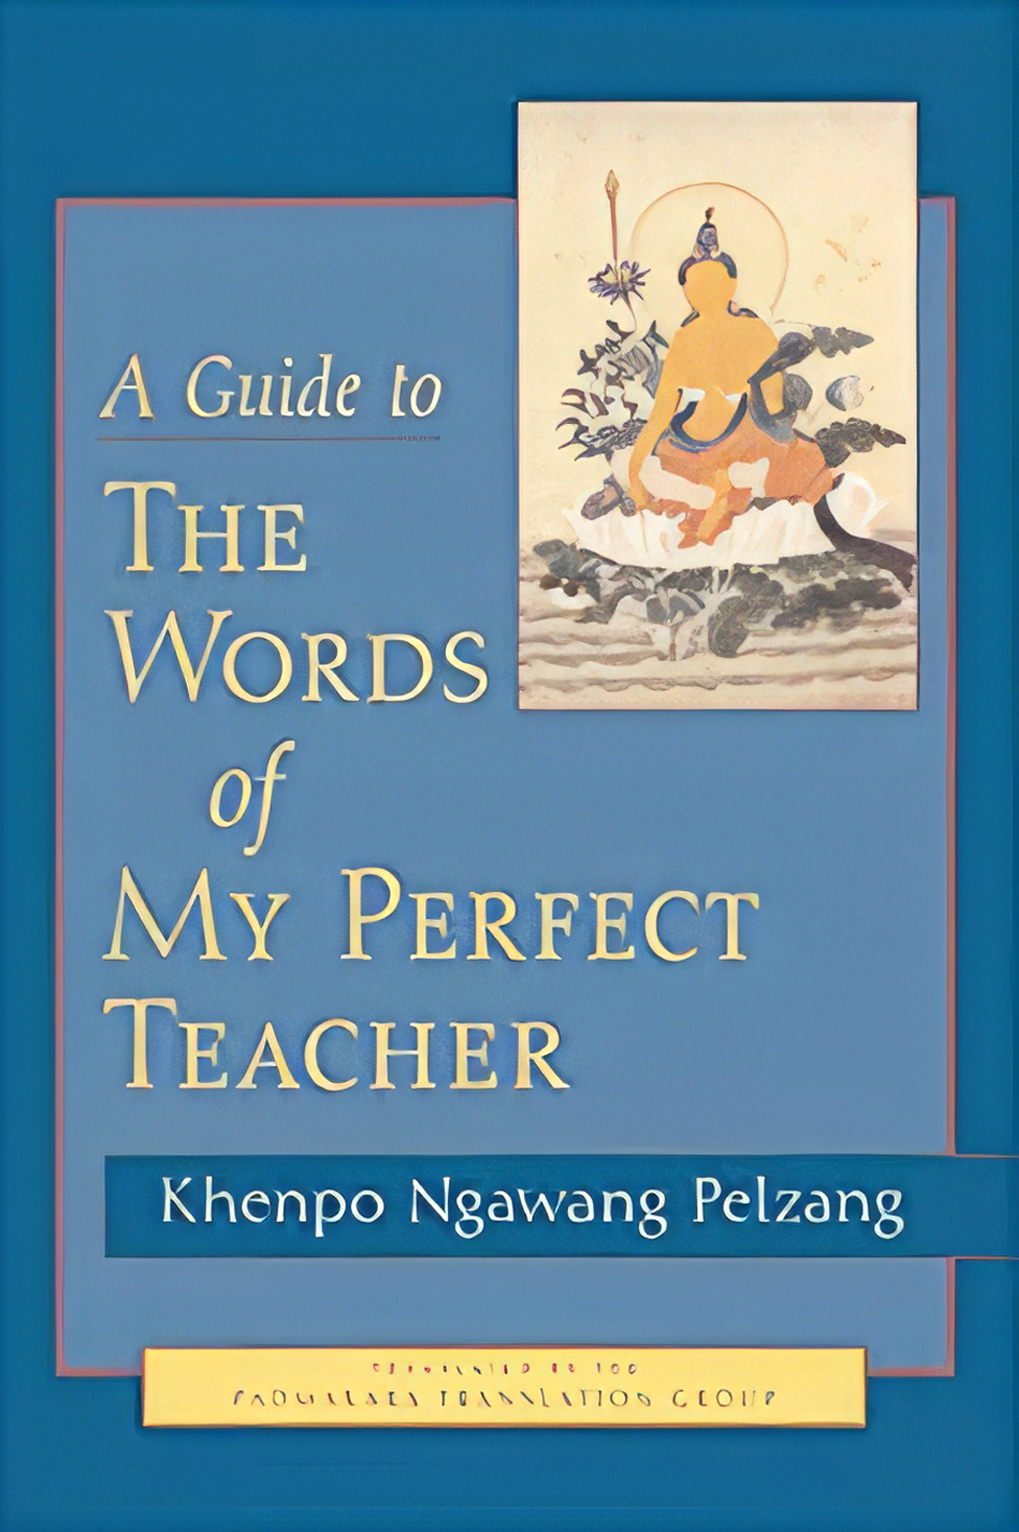 A Guide to the Words of My Perfect Teacher